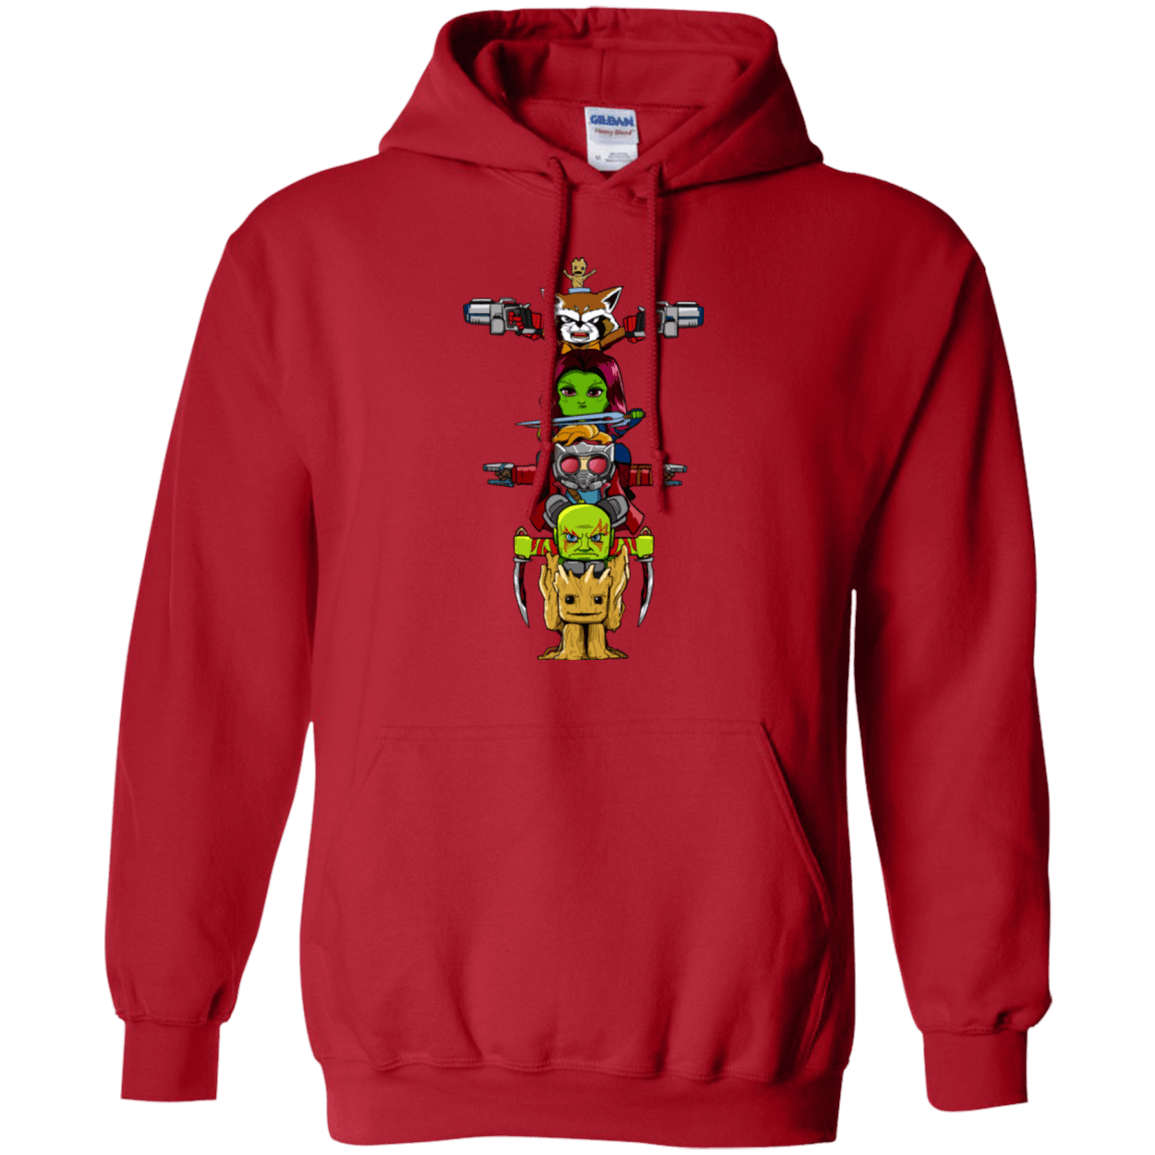 Sweatshirts Red / Small GOTG Totem Pullover Hoodie